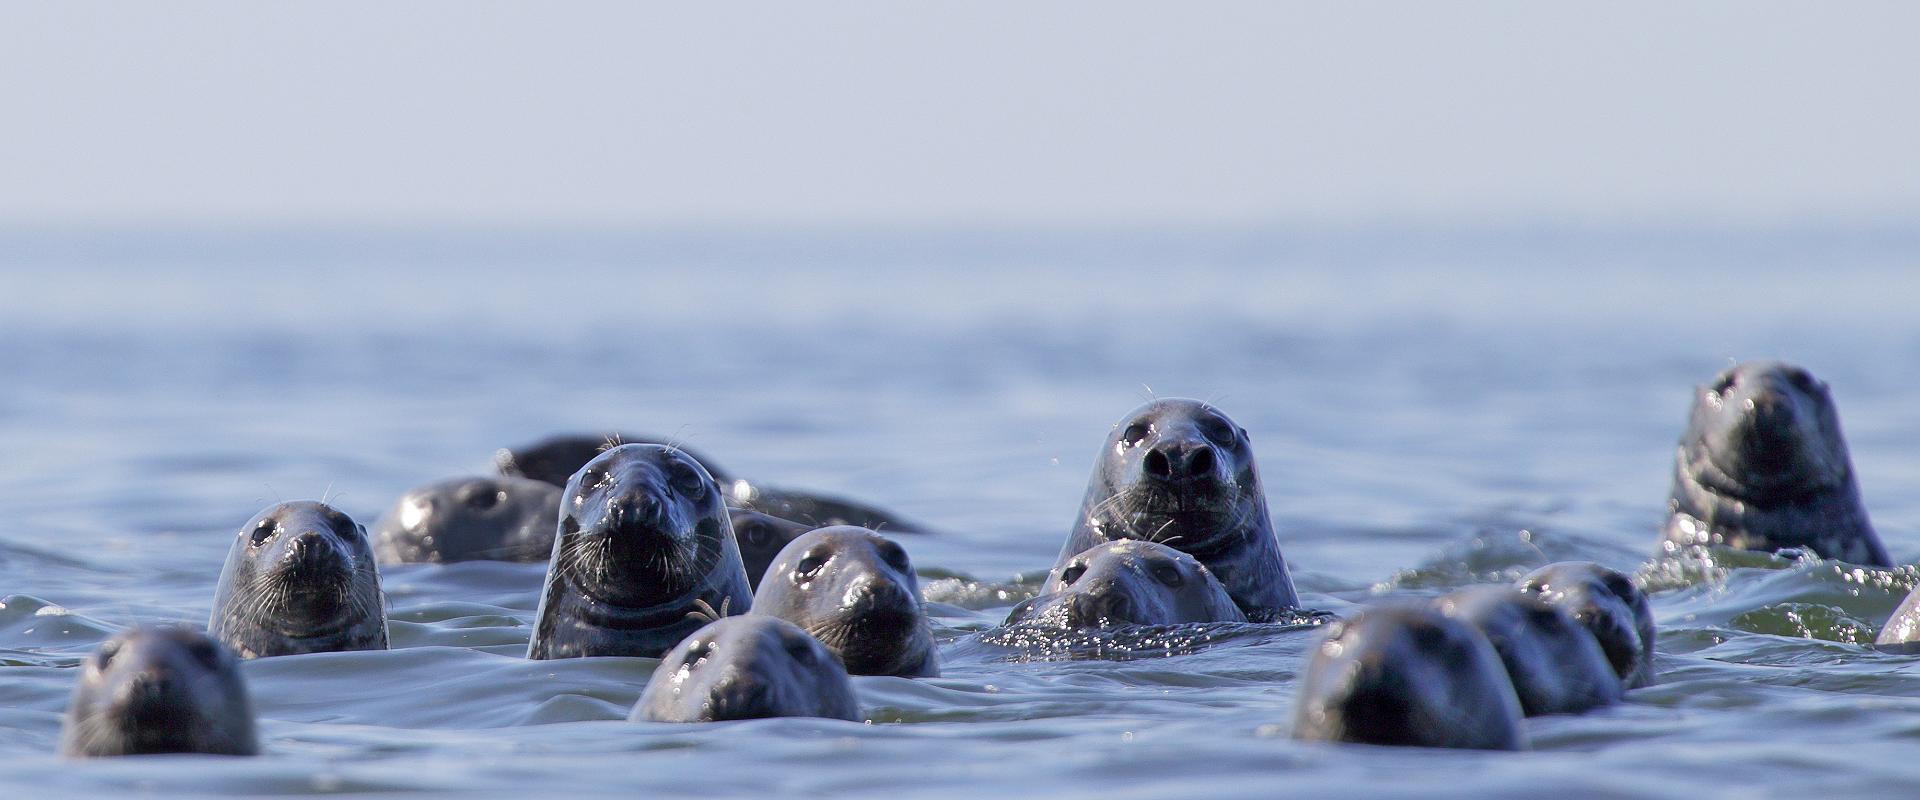 Regular Seal Observation Trips among the Islands of Kolga Bay start from the Neeme Harbour and take place on Sundays at 11 am from July to September. 